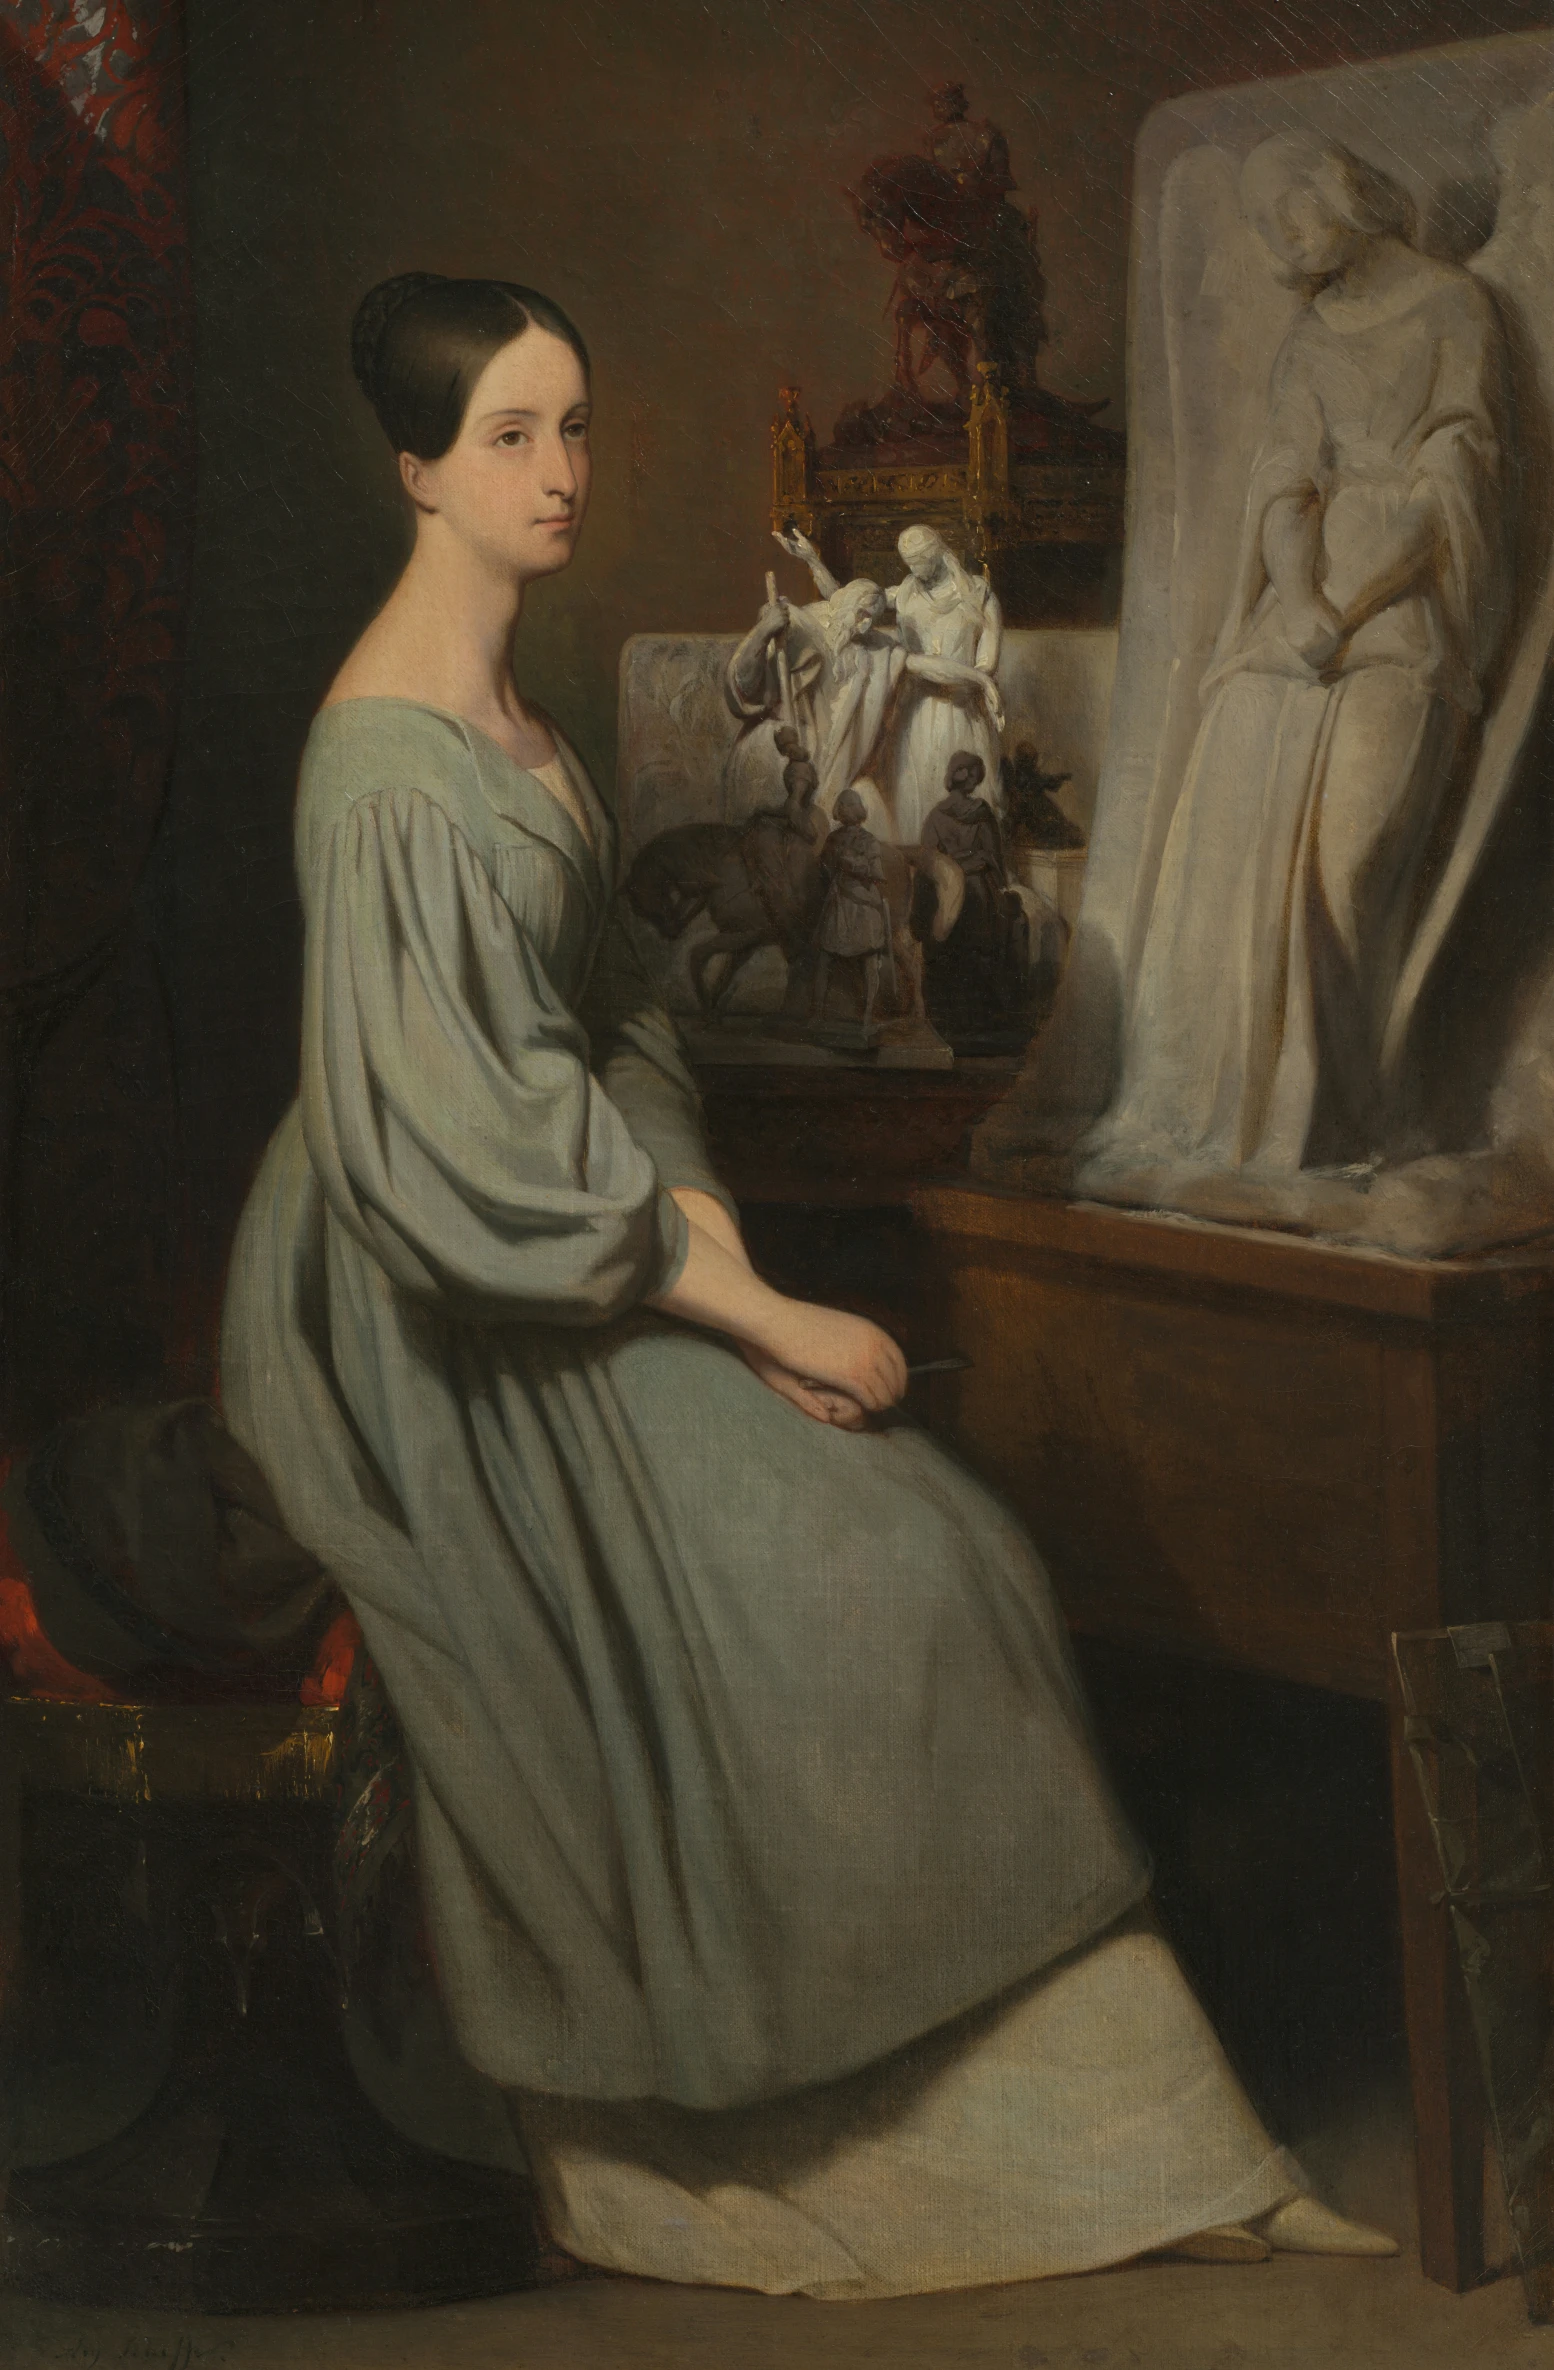 the woman in the dress sits near an easel